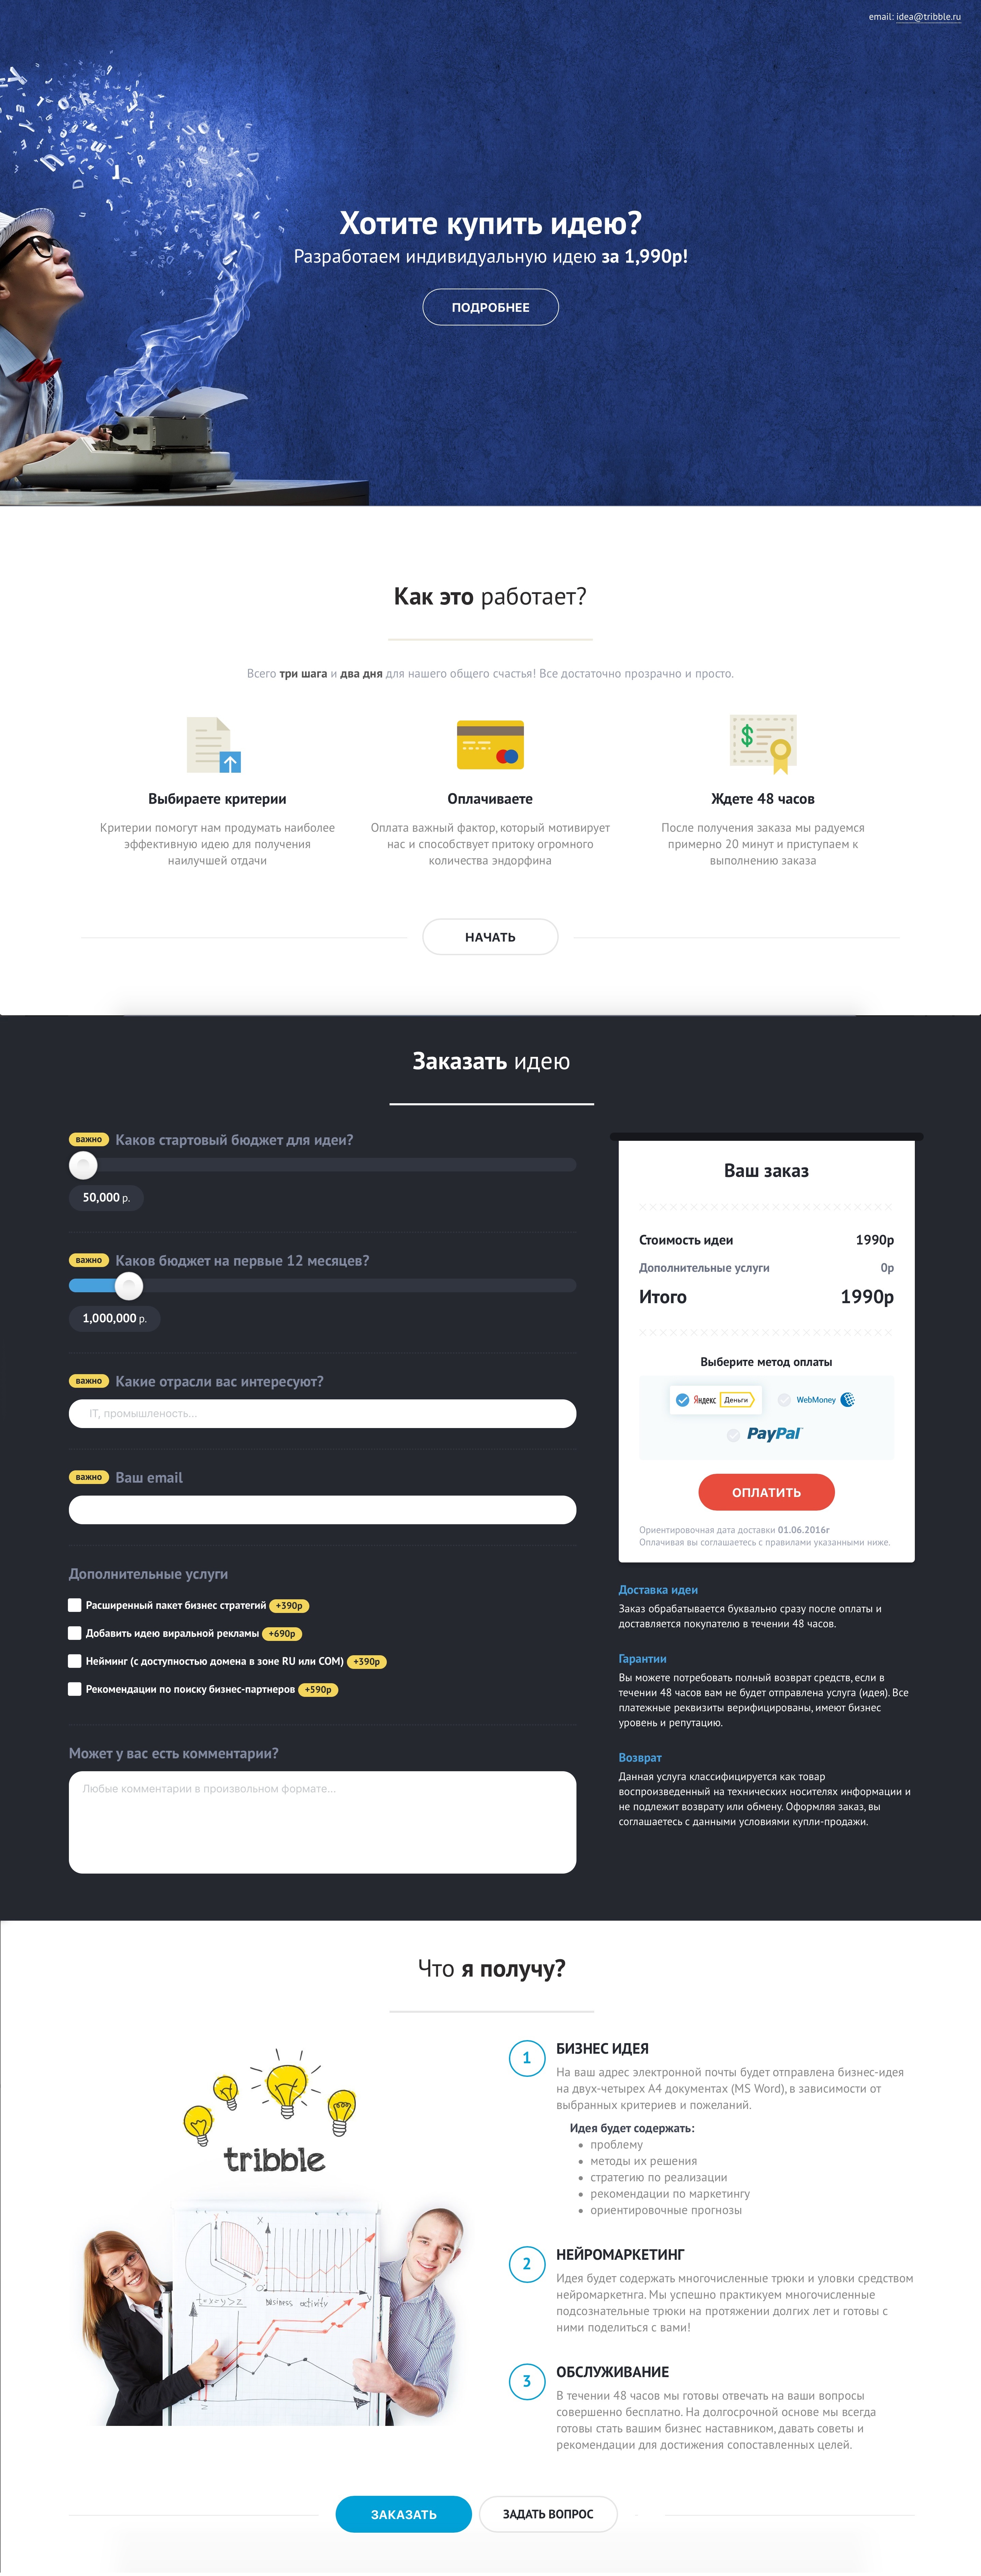 Landing page for Tribble №1